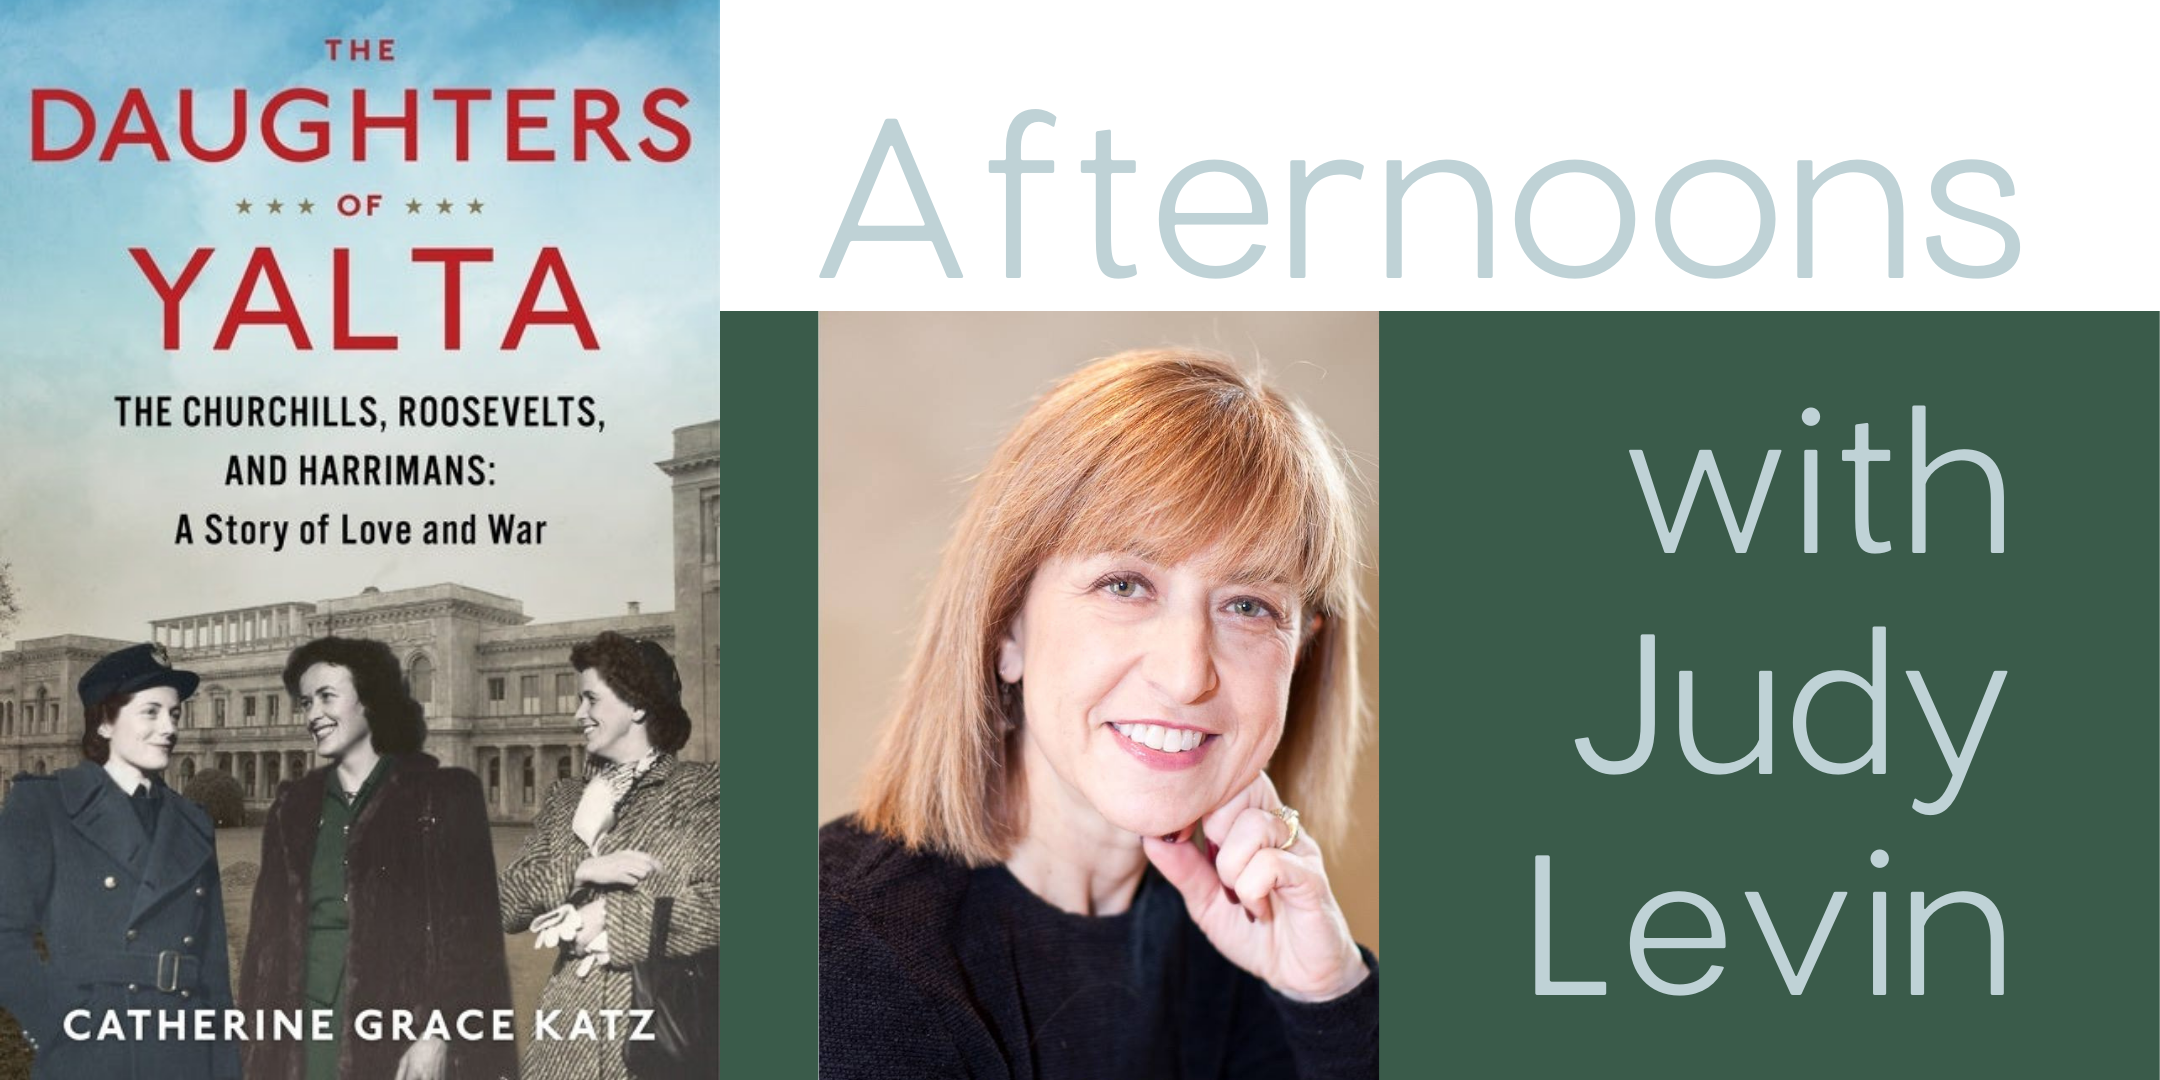 Afternoons with Judy Levin image featuring the book cover "The Daughters of Yalta" event image